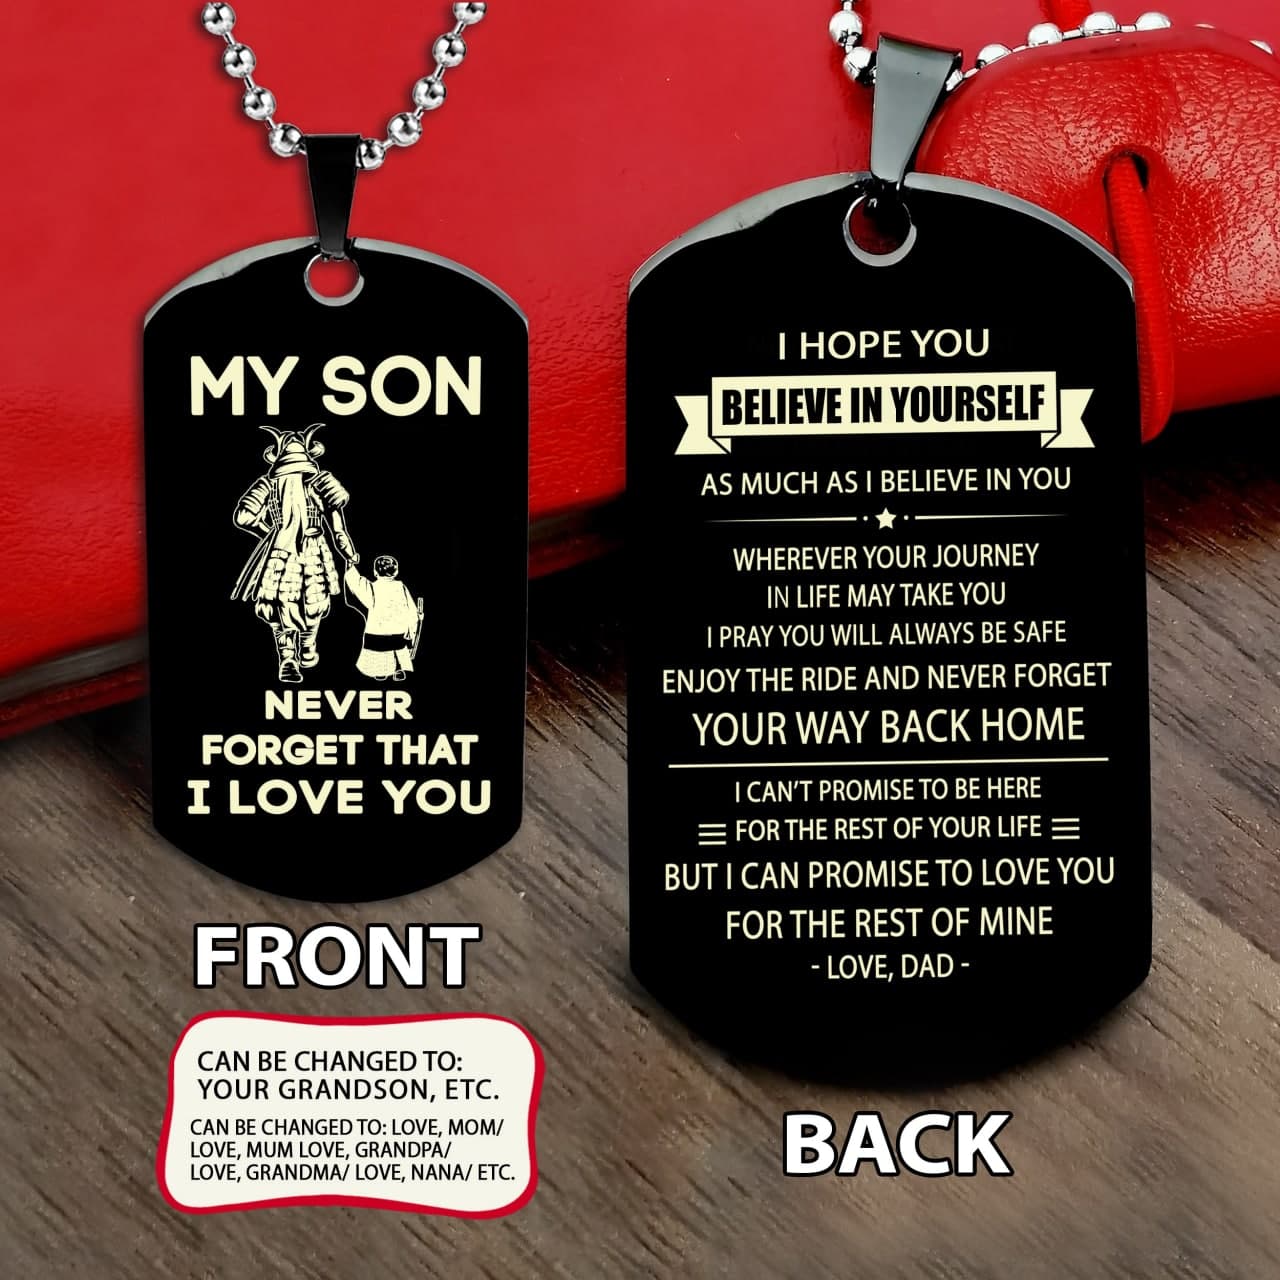 Samurai engraved dog tag dad mom to son, Be strong be brave be humble, It is not about better than someone else, It is about being better than you were the day before